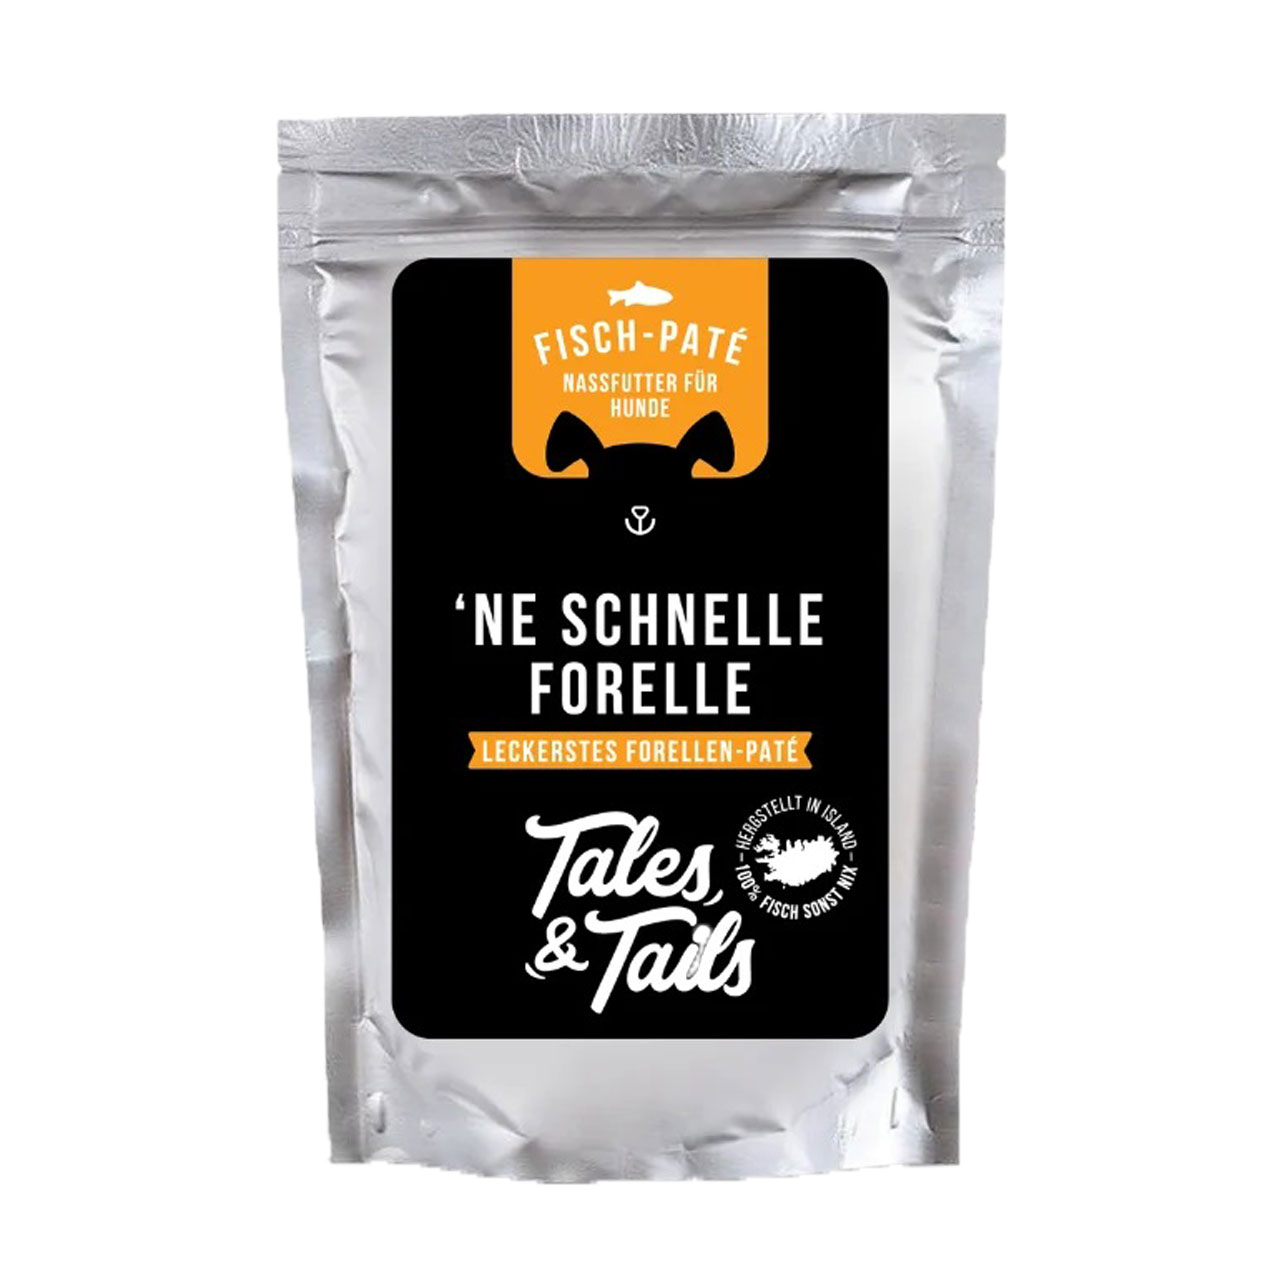 Ne schnelle Forelle - wet food for dogs made from 100% trout